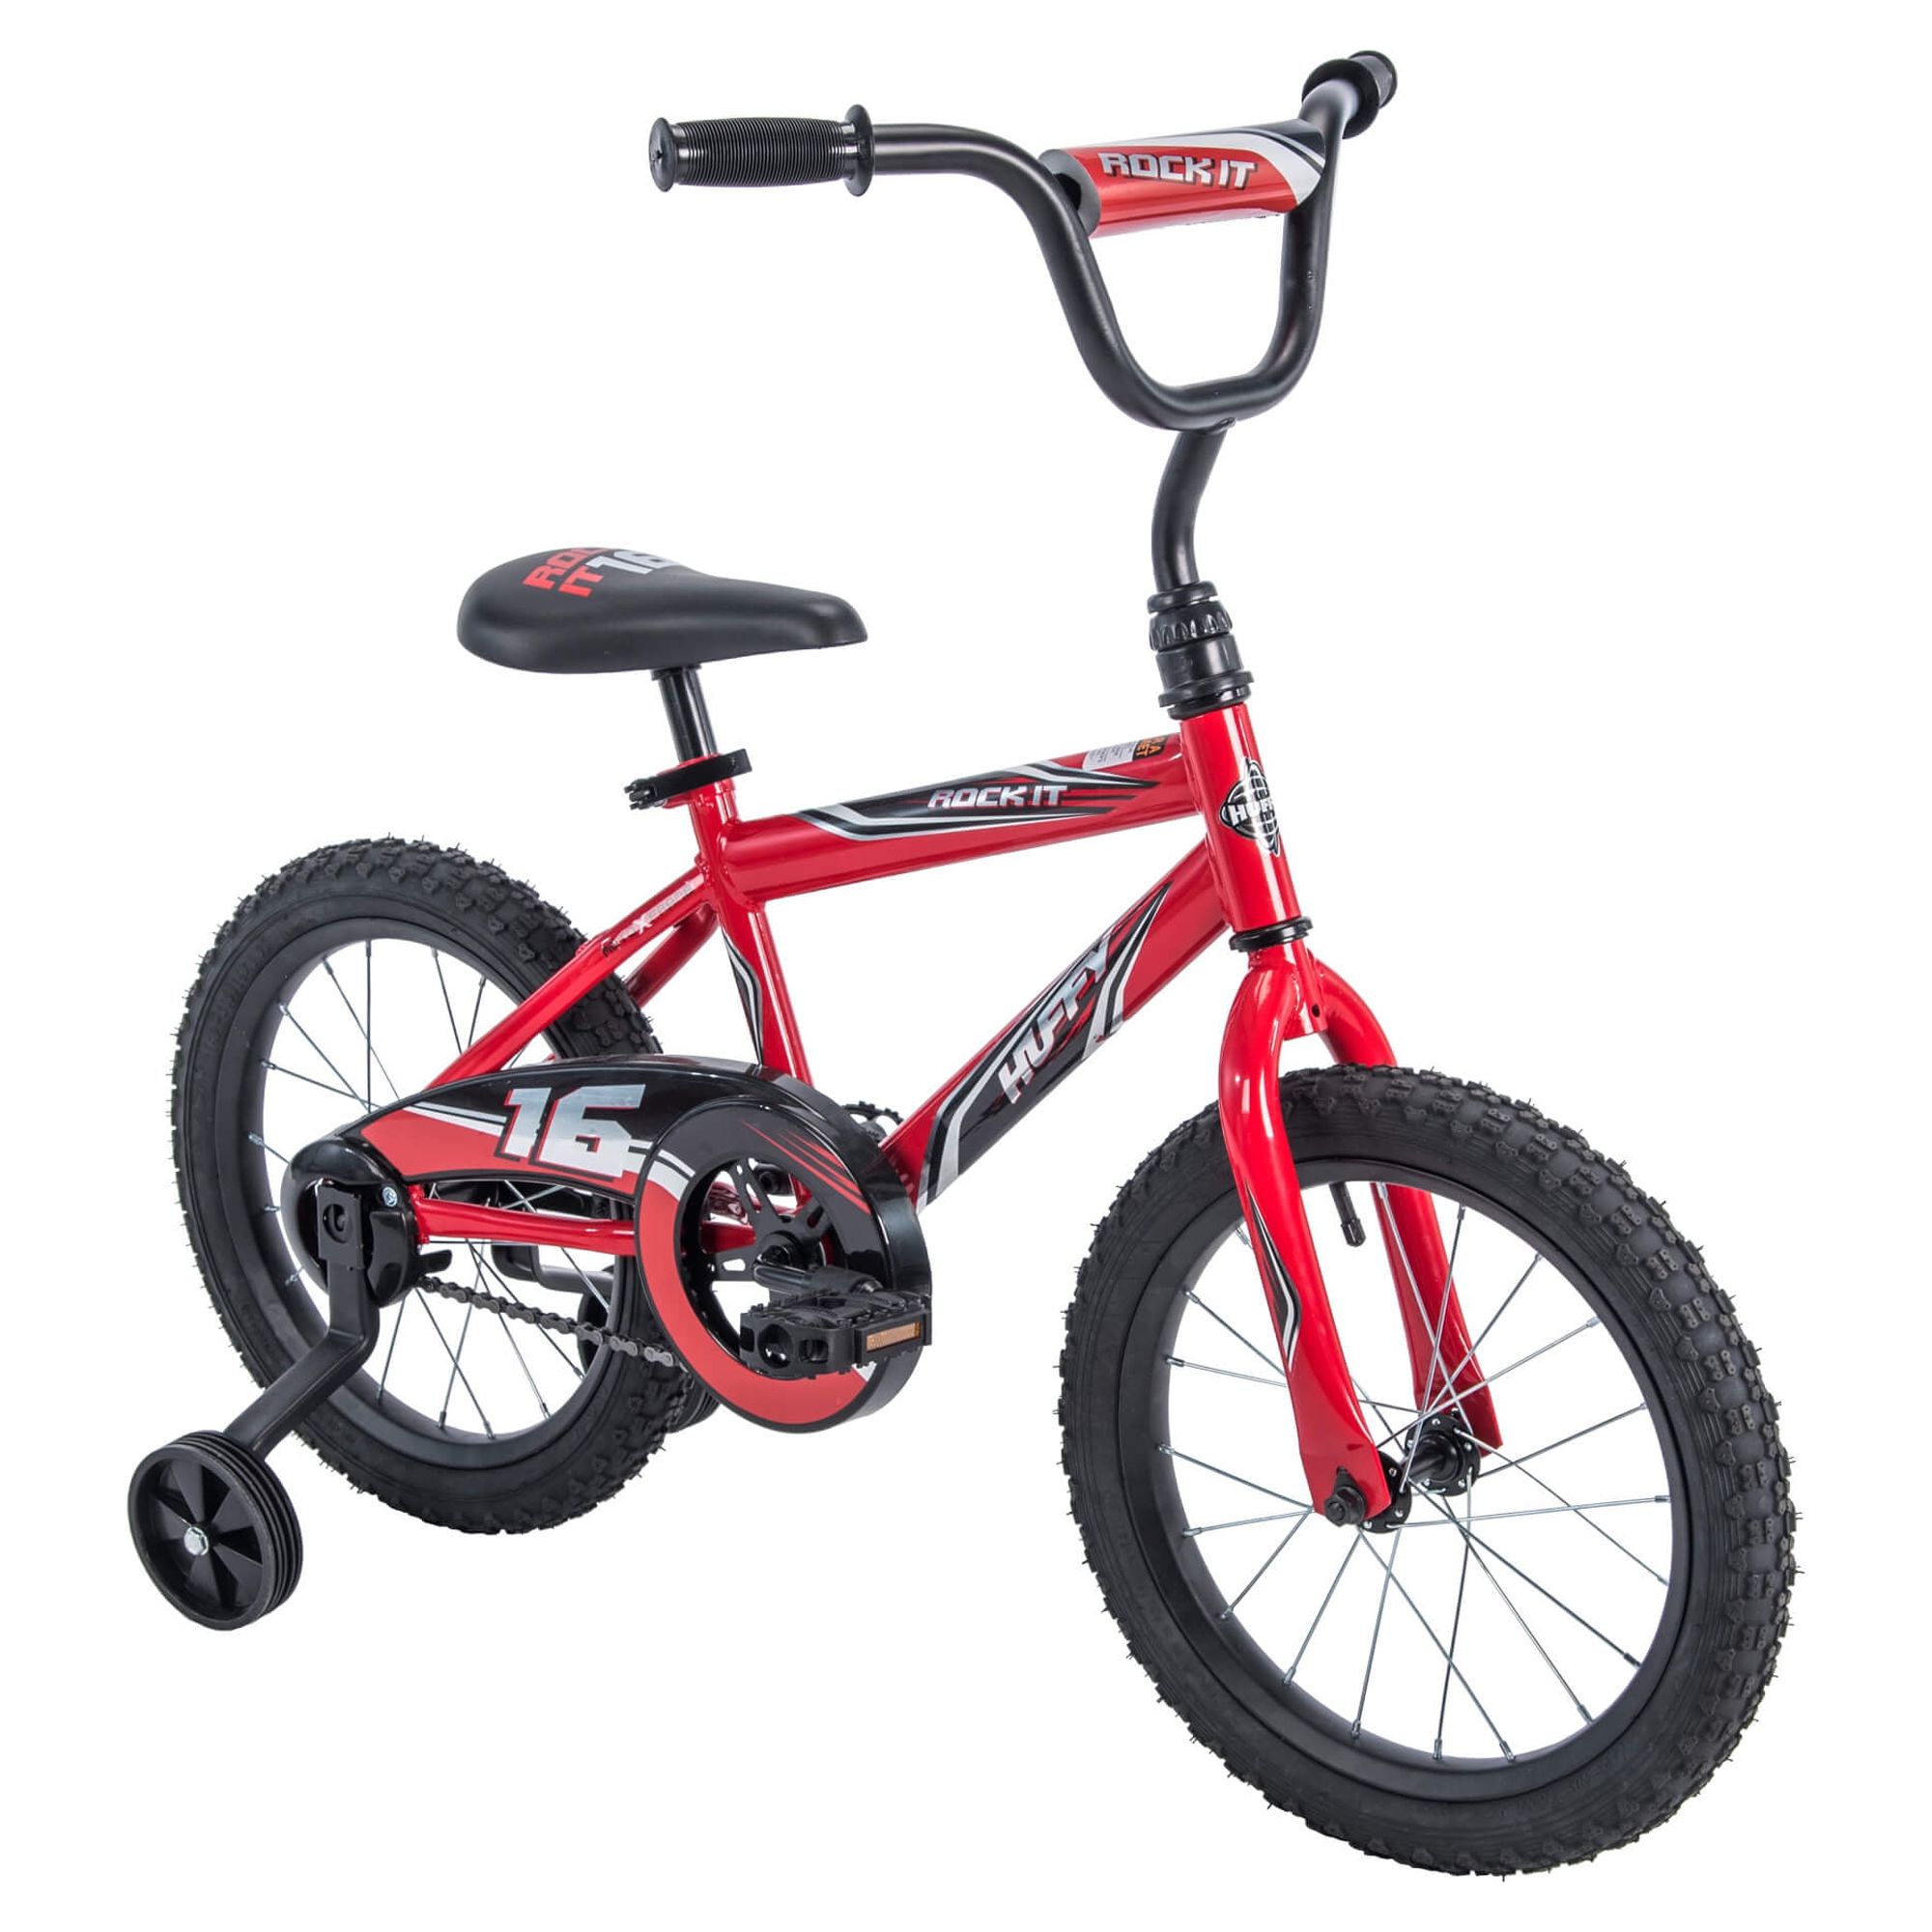 Huffy 16 in. Rock It Kids Bike for Boy Ages 4 and up, Child, Red - image 2 of 10